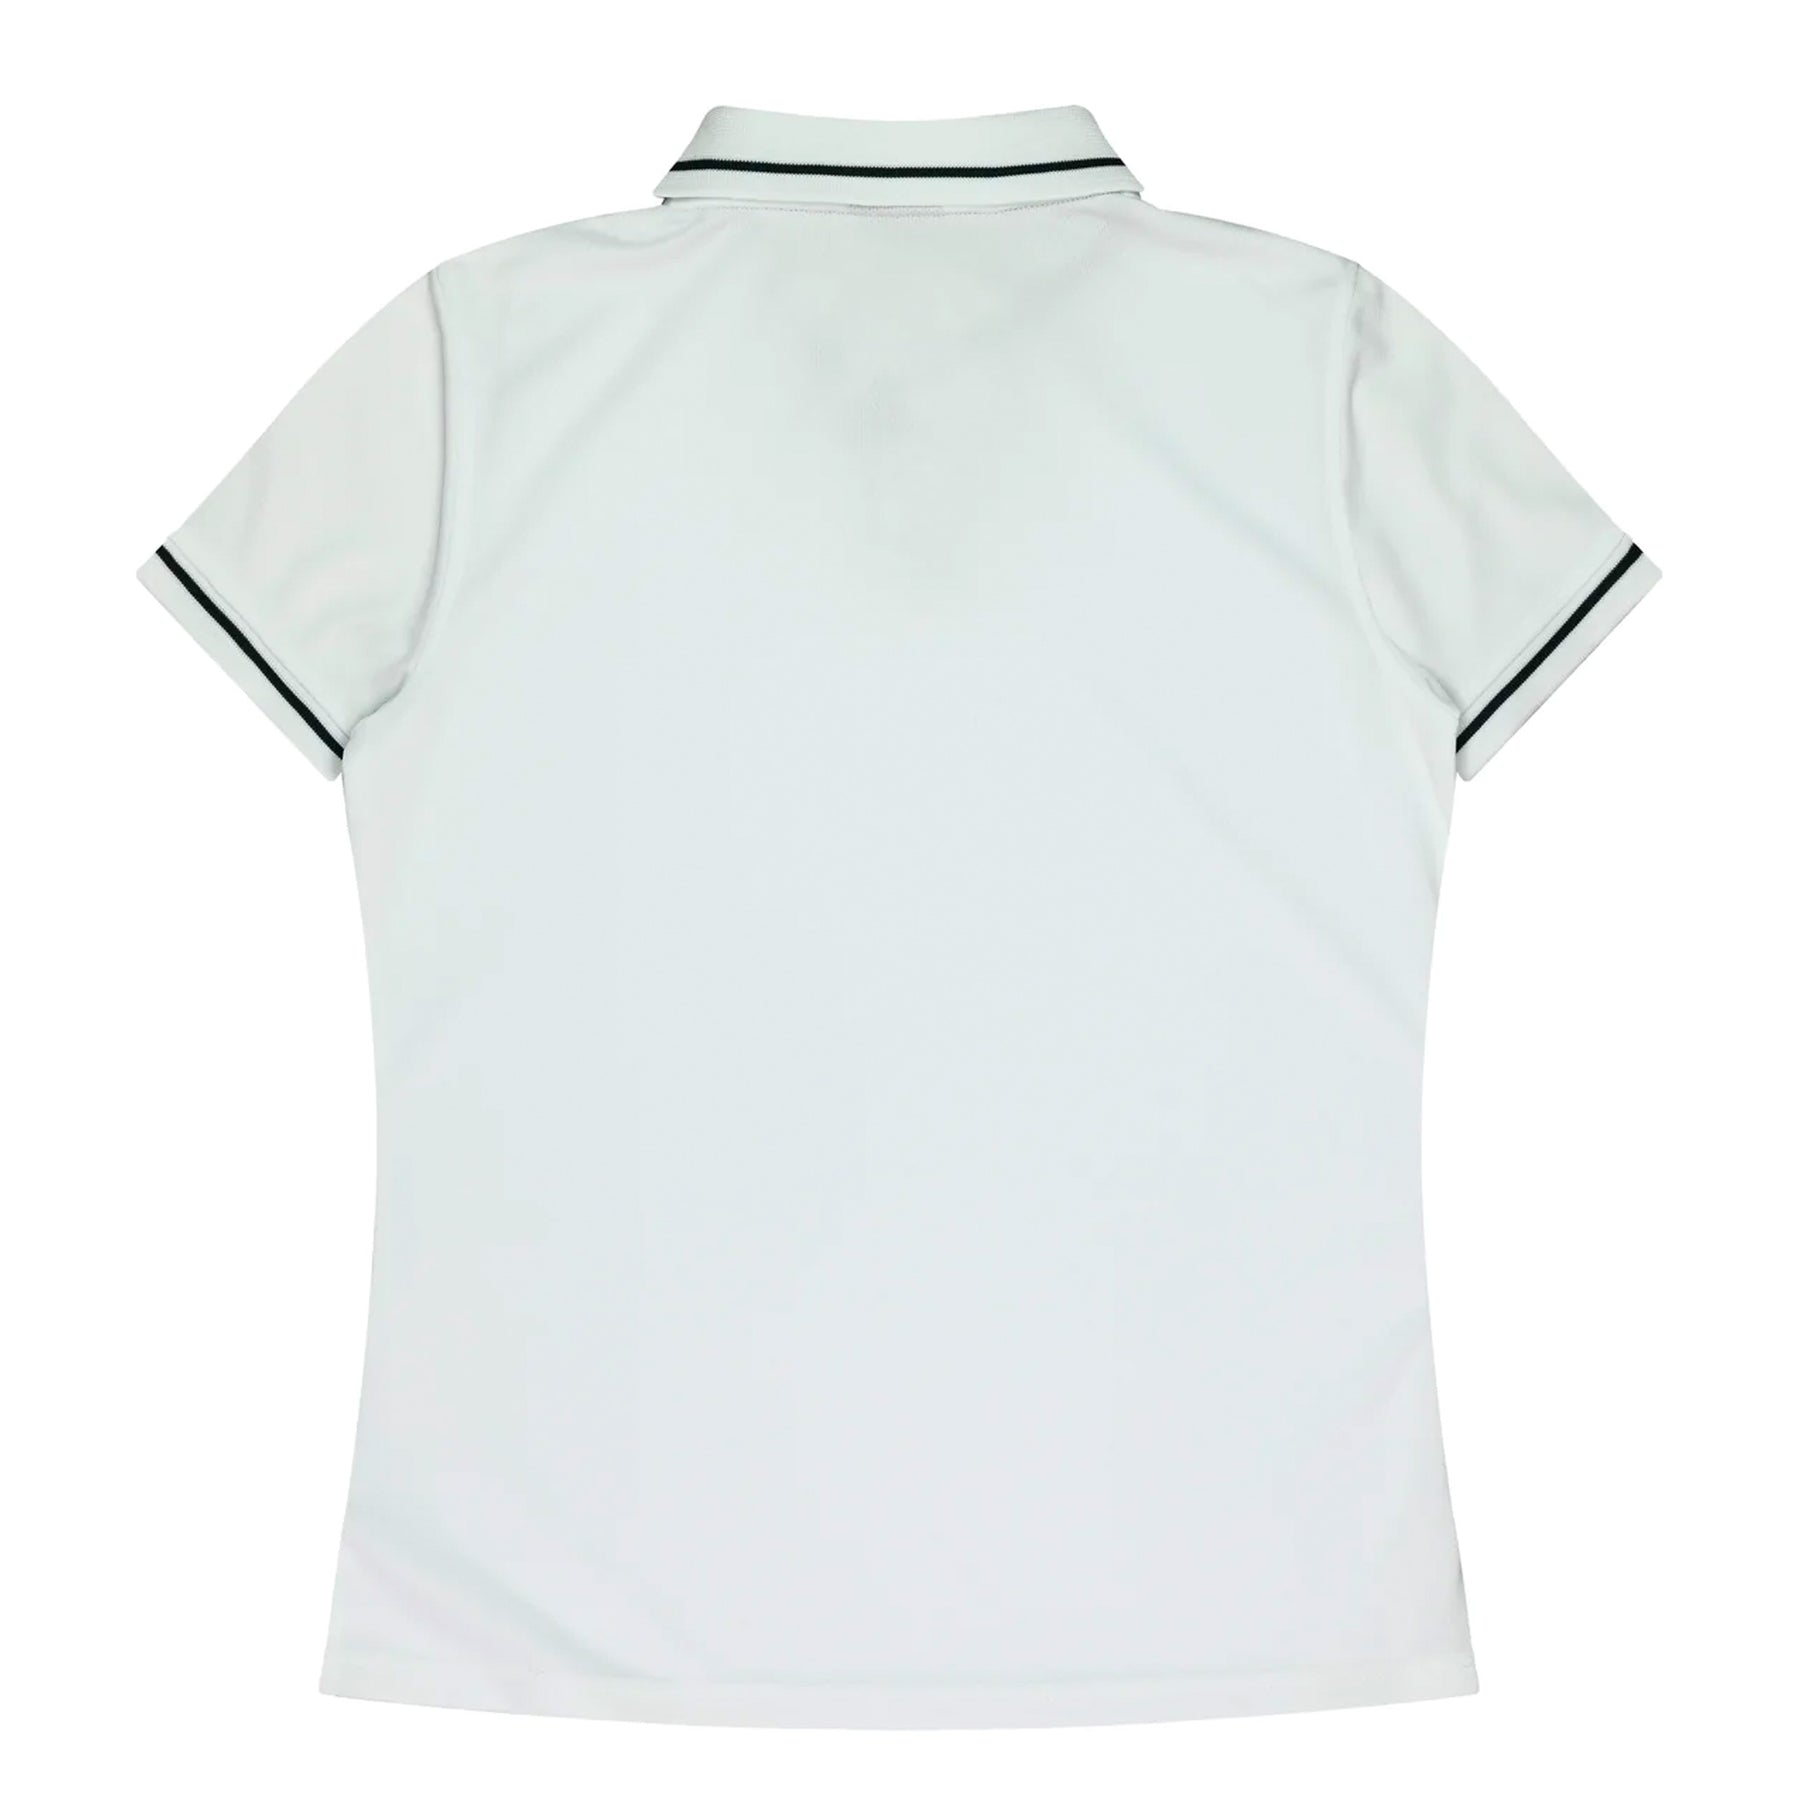 cottesloe ladies polo in white navy